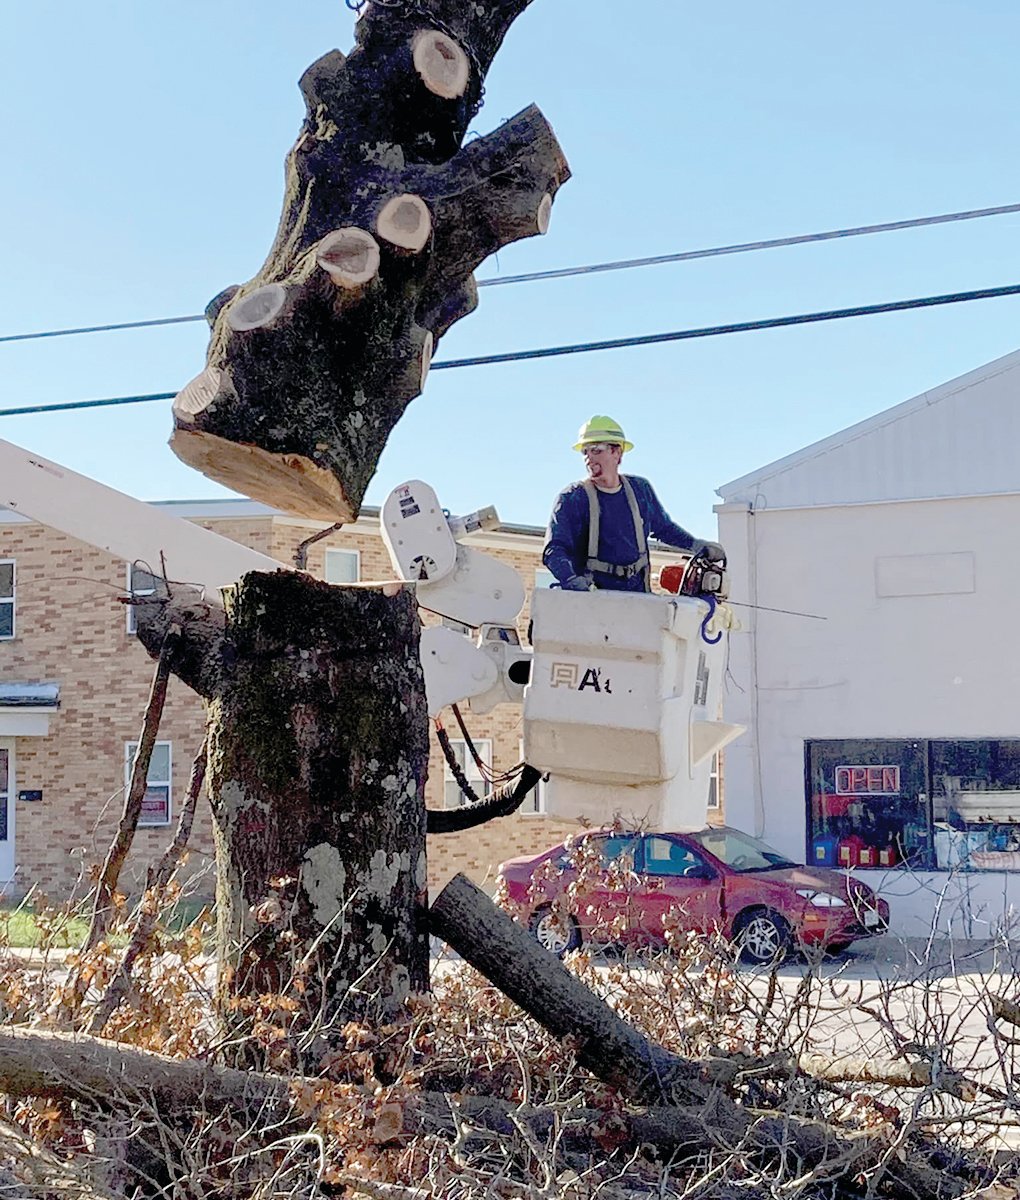 The old dead tree in front of St. George School in Linn was cut down by Matt Seifert and his crew at Three Rivers Electric Cooperative on Dec. 3.